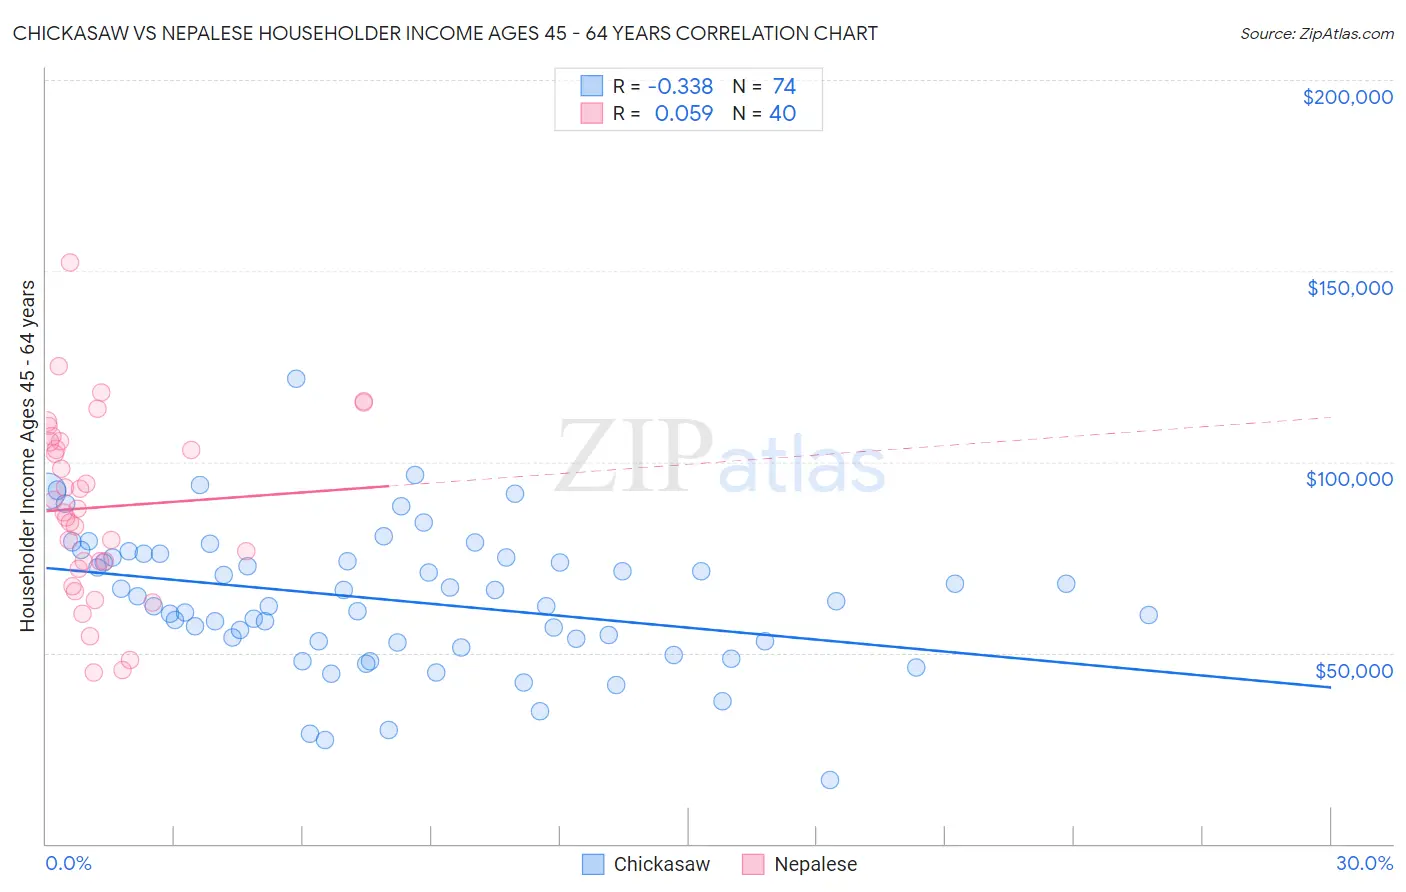 Chickasaw vs Nepalese Householder Income Ages 45 - 64 years